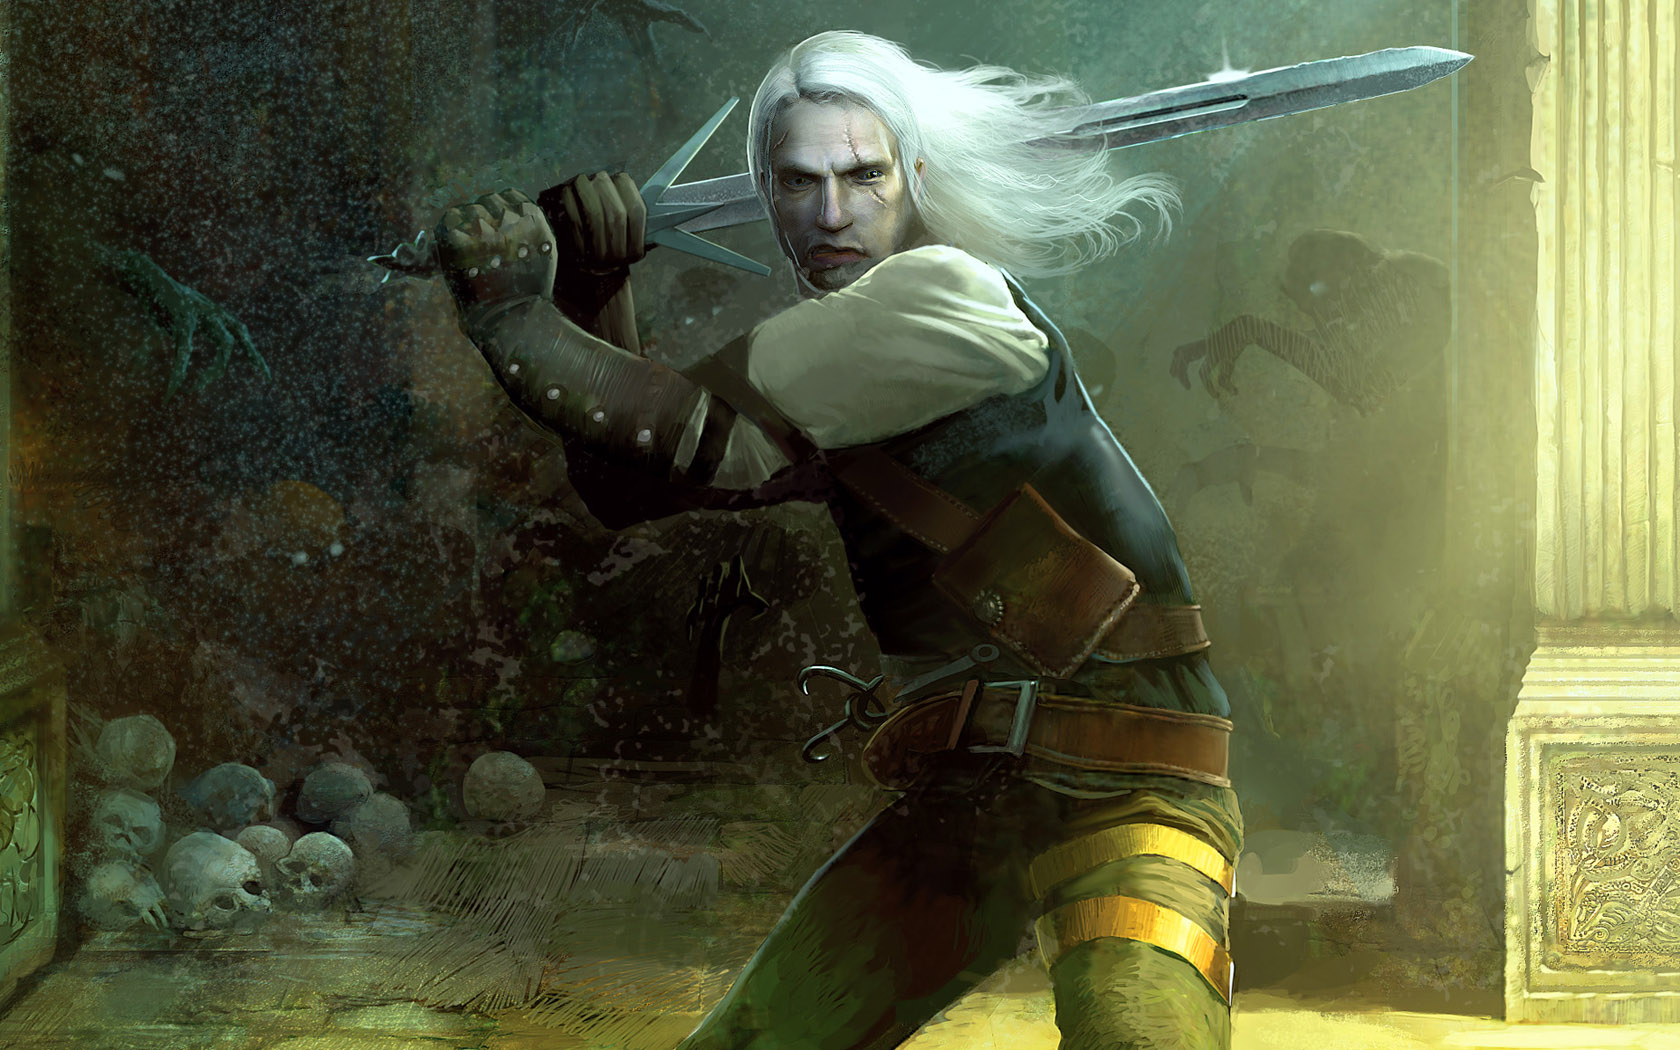 Download full size The Witcher The Witcher wallpaper / 1680x1050